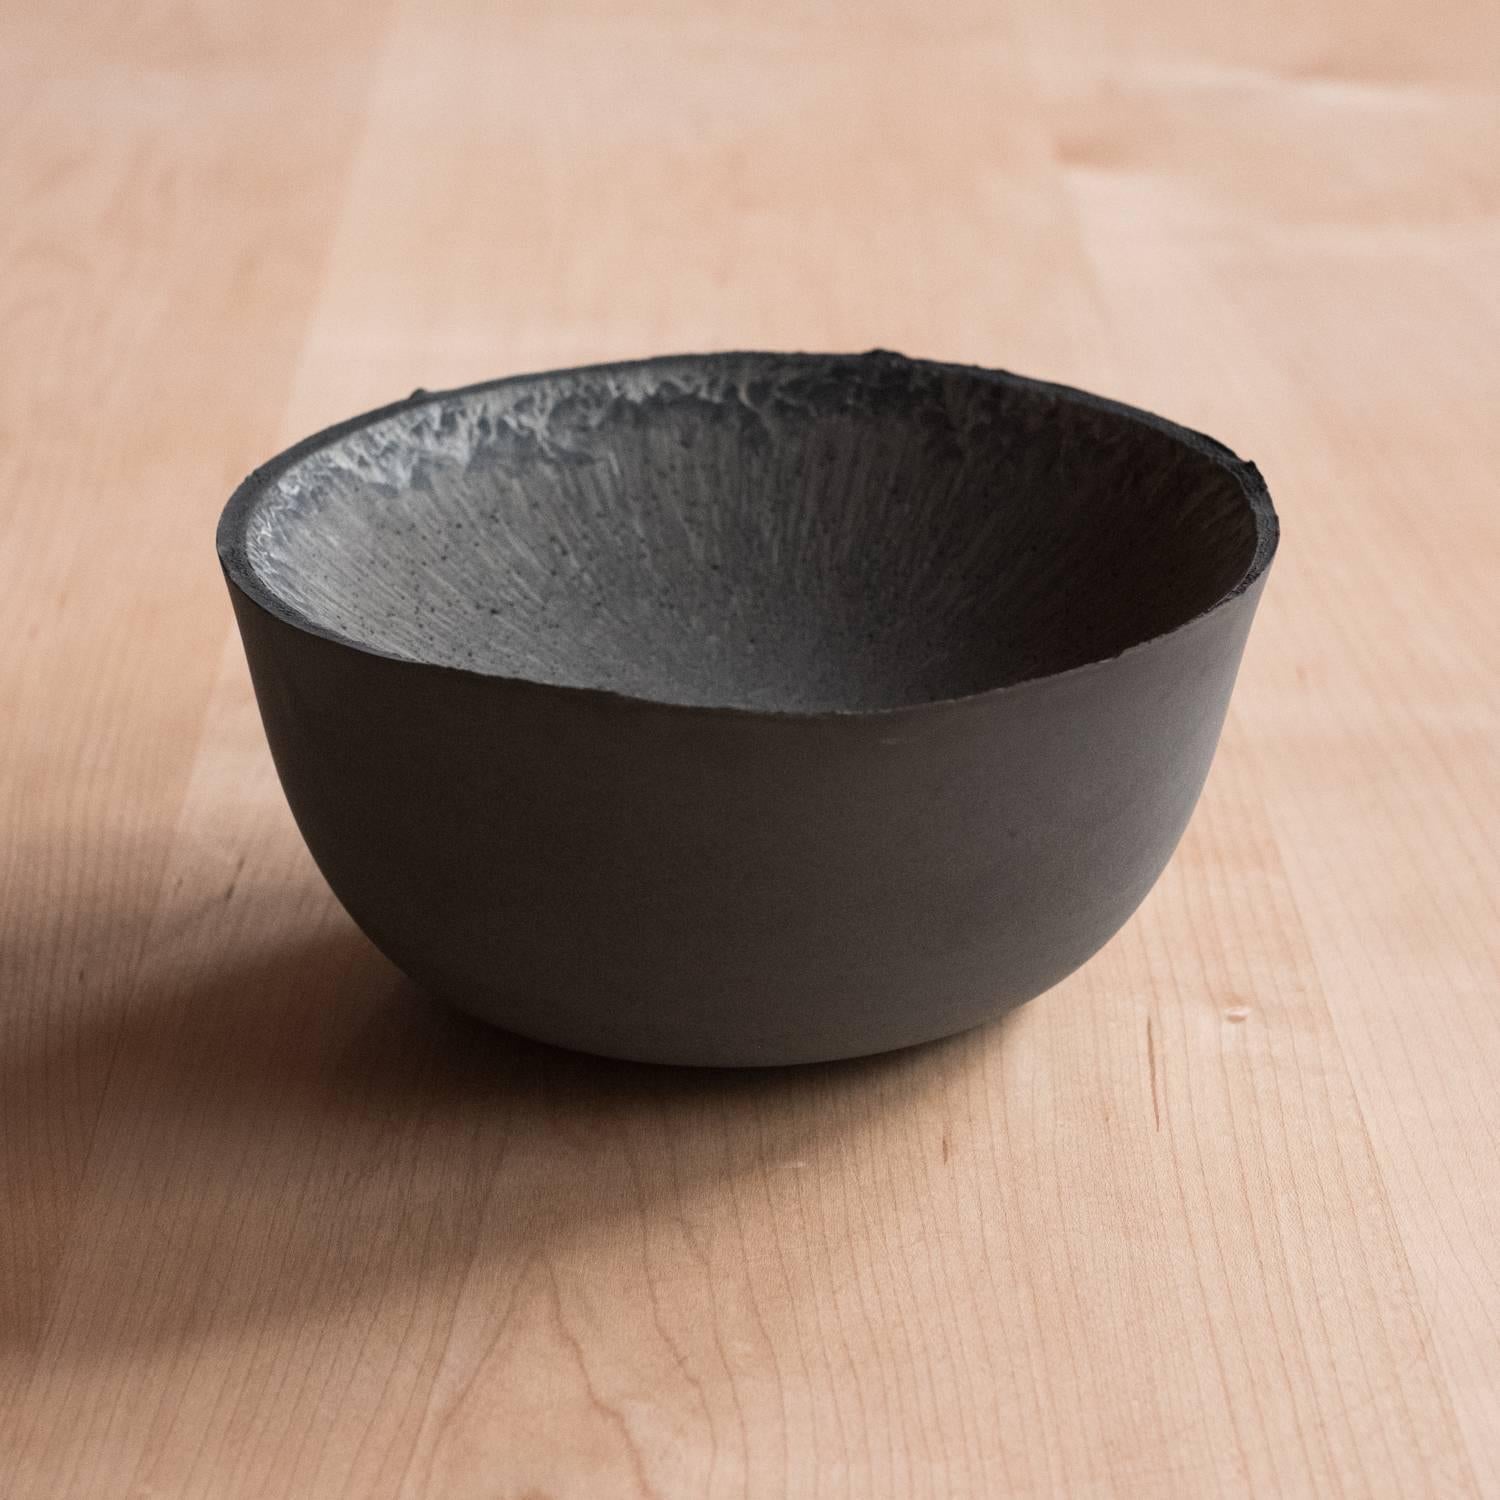 A collection of 236 unique bowls, the Concrete series by UMÉ Studio expresses the tension between heavy concrete and its delicate edge generated by hand pouring. While one assumes concrete should be strong and durable, it is, at its core, fragile.